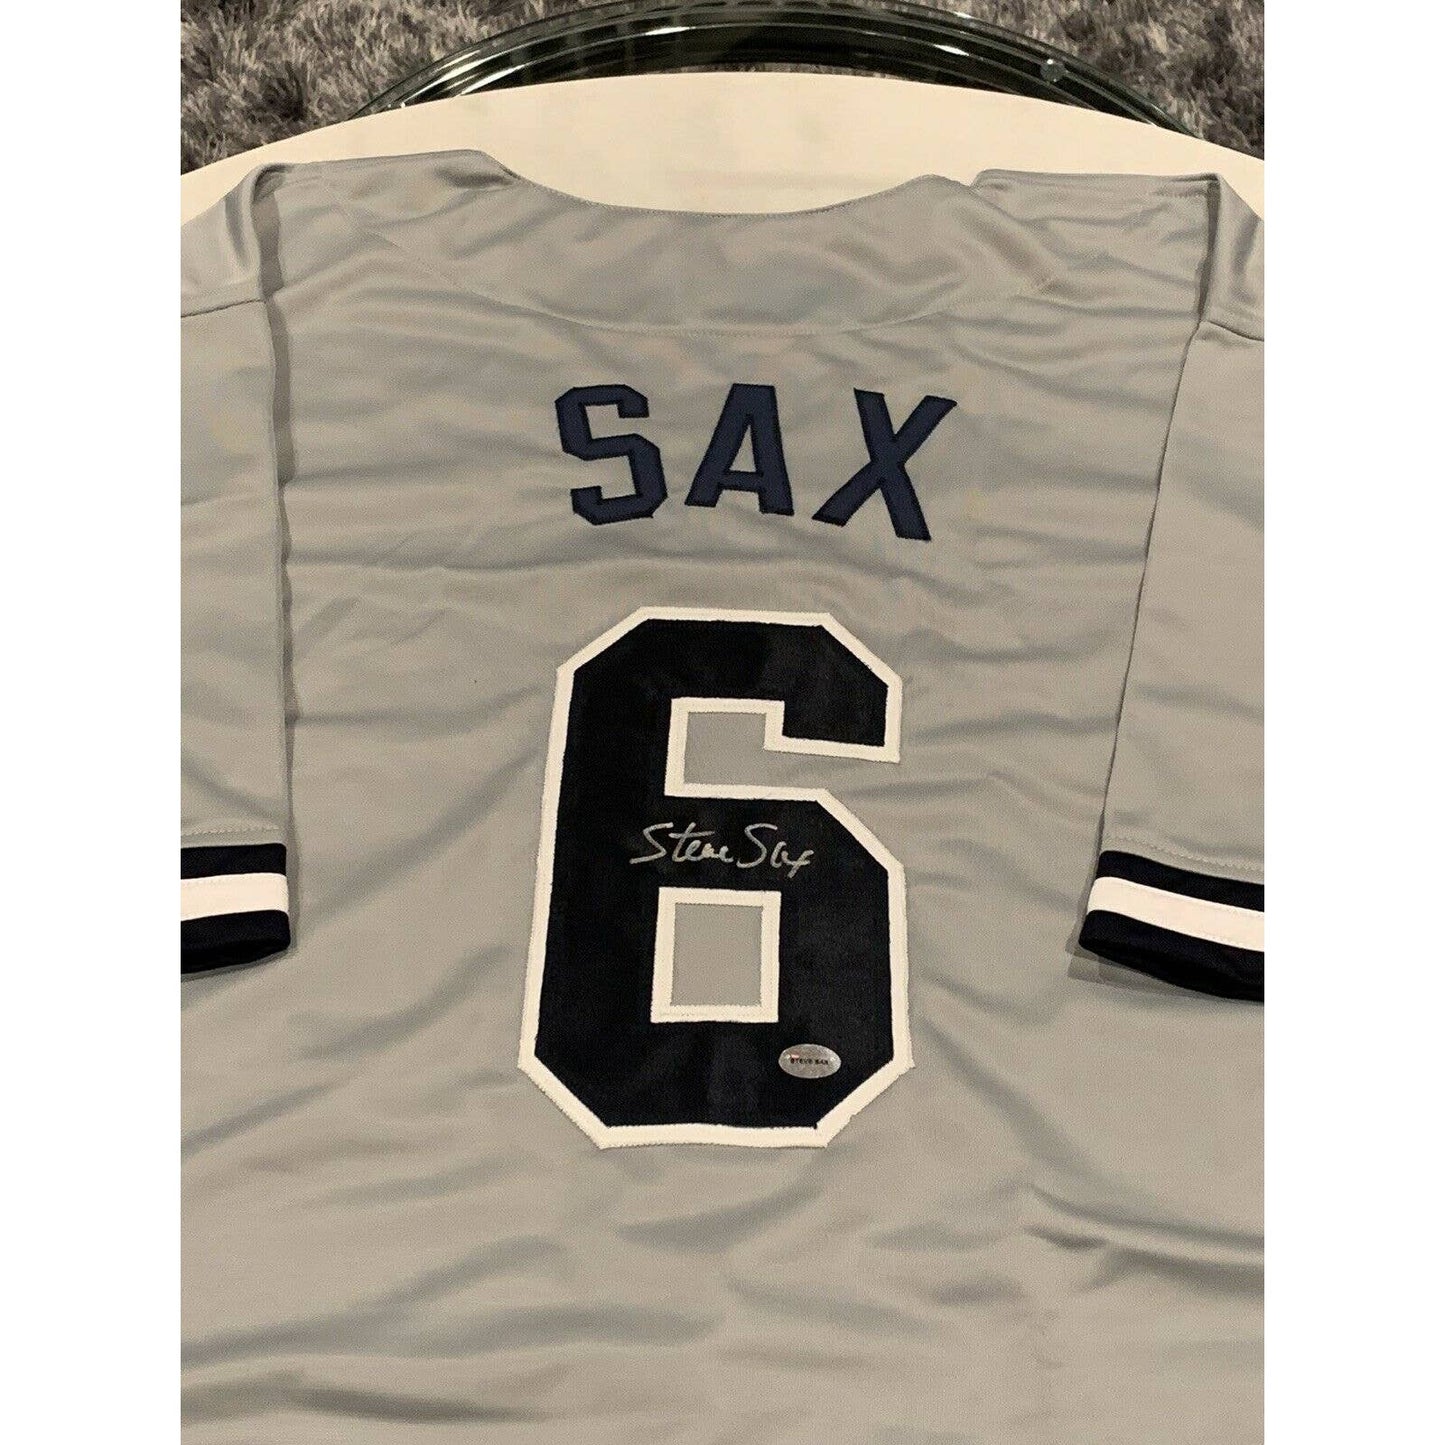 Steve Sax Autographed/Signed Jersey New York Yankees - TreasuresEvolved